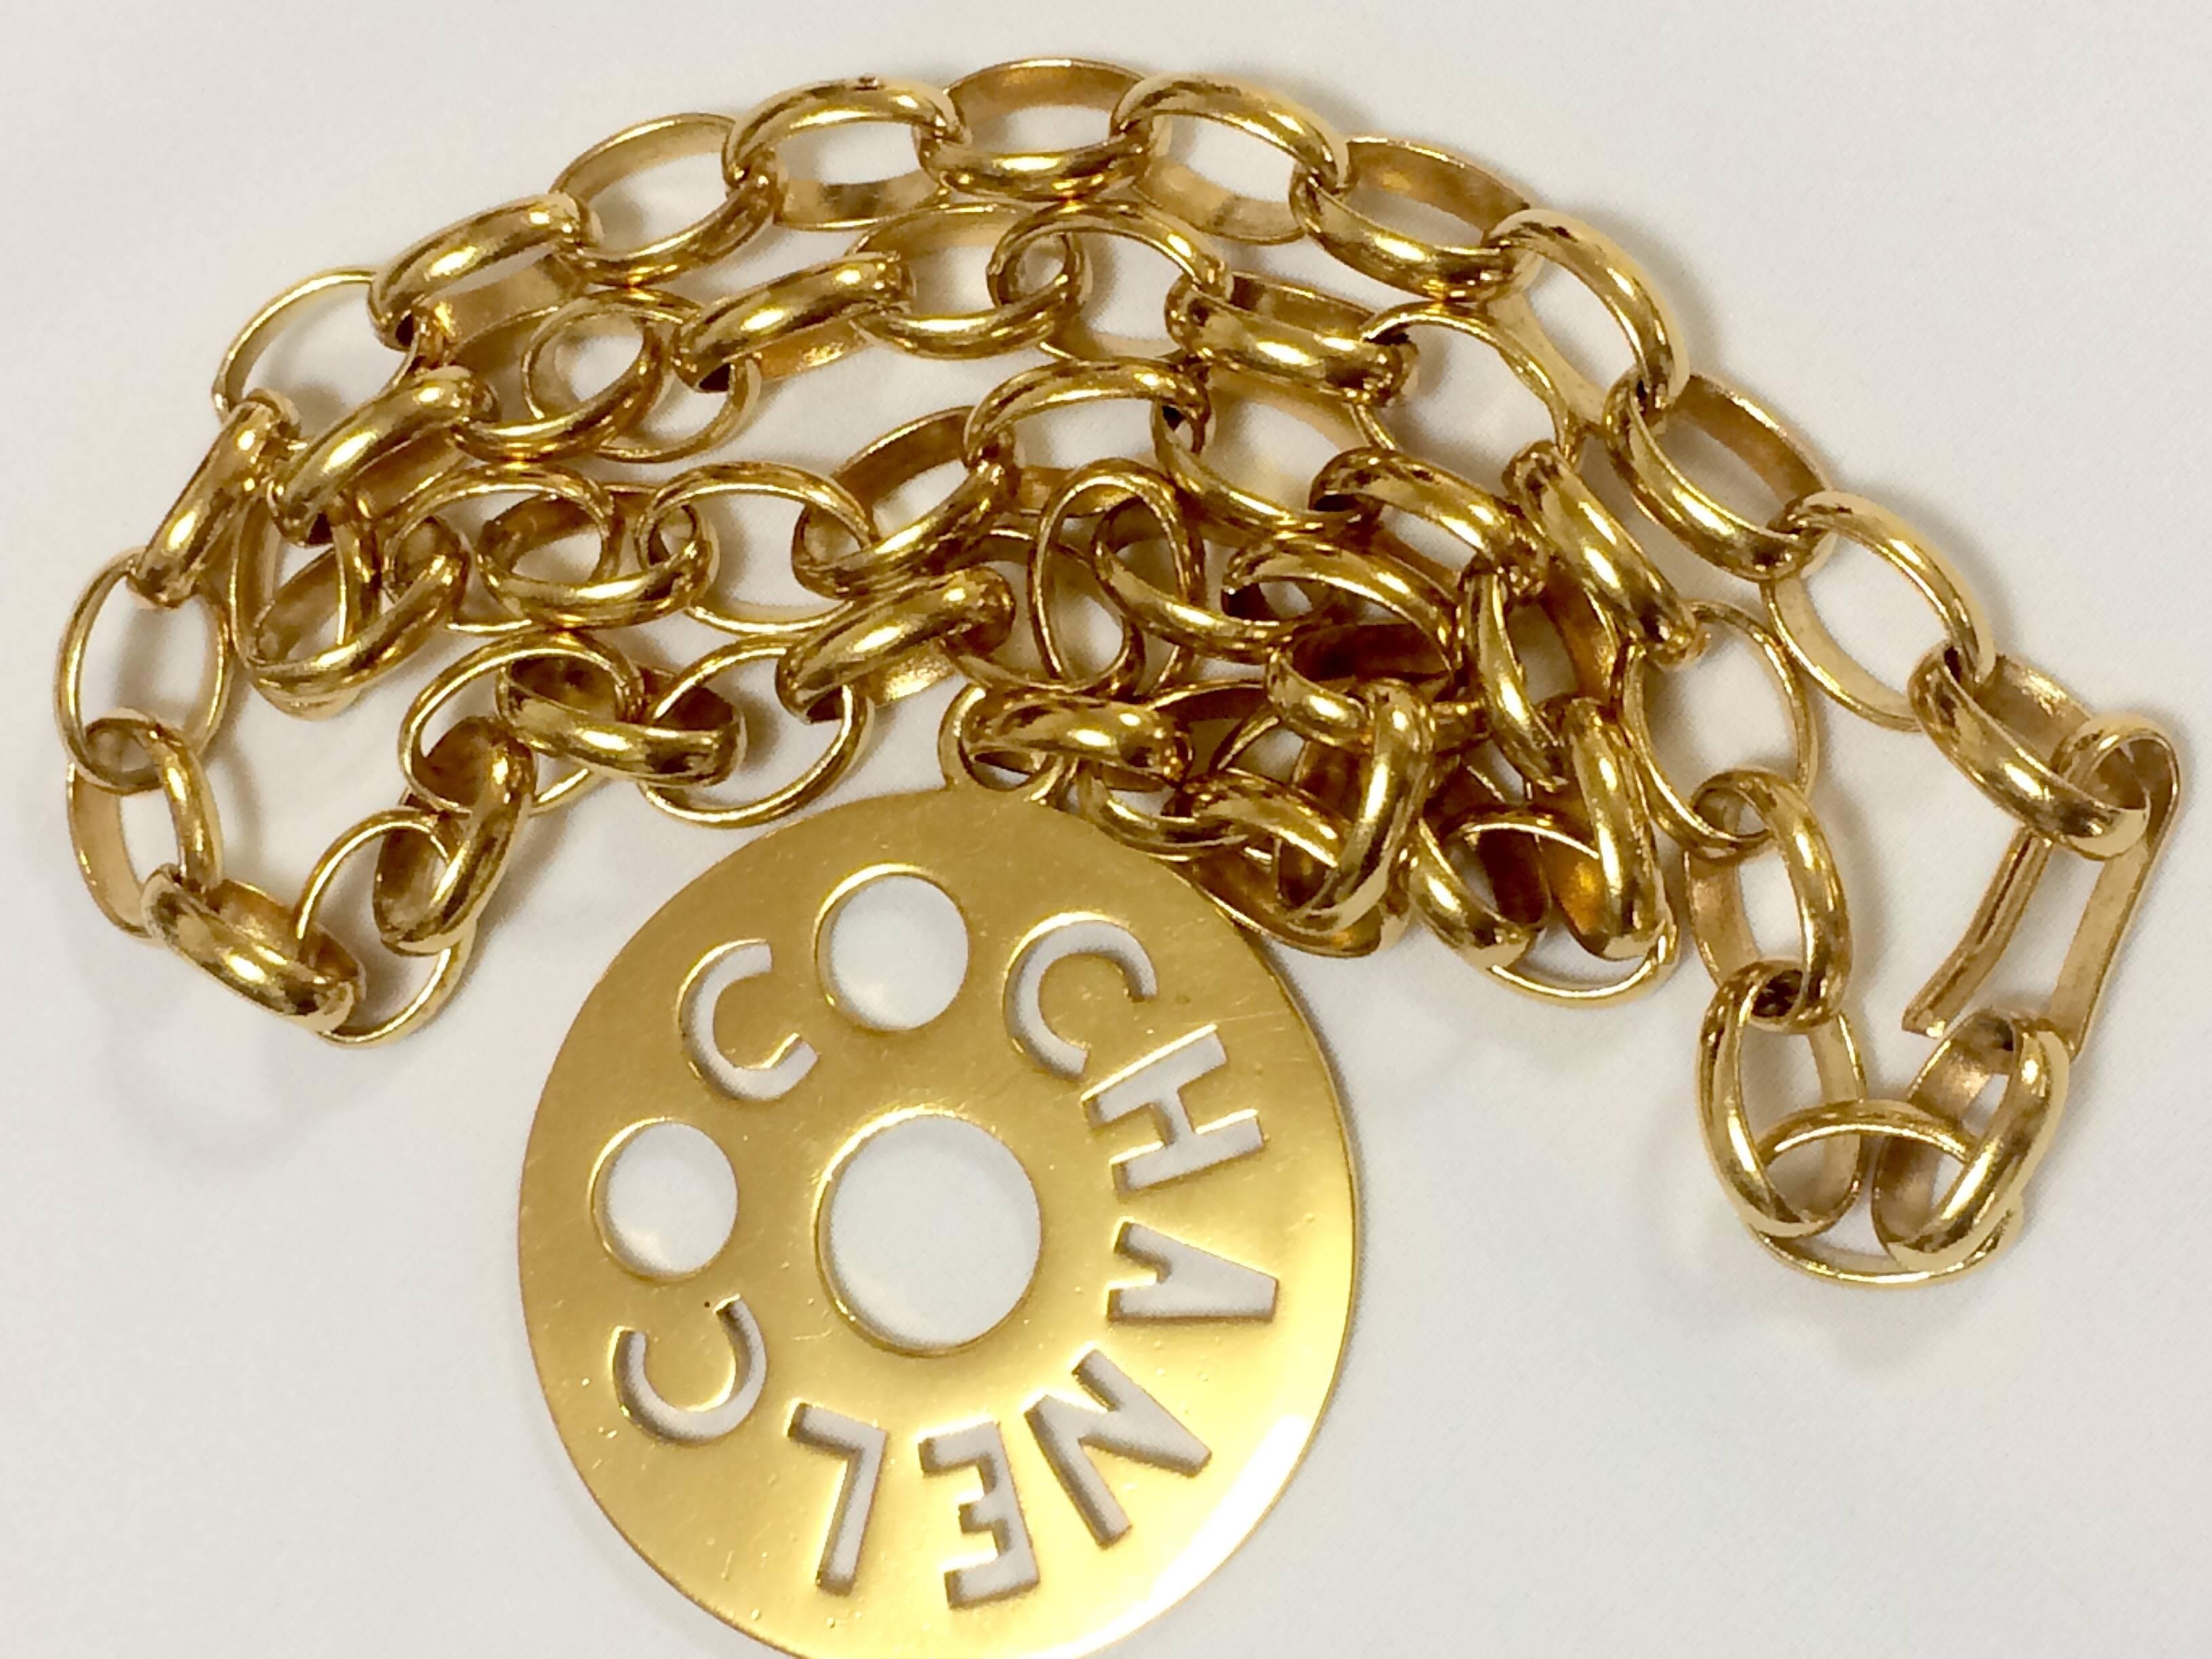 Vintage CHANEL golden chain necklace, chain belt with round logo COCO top. 1